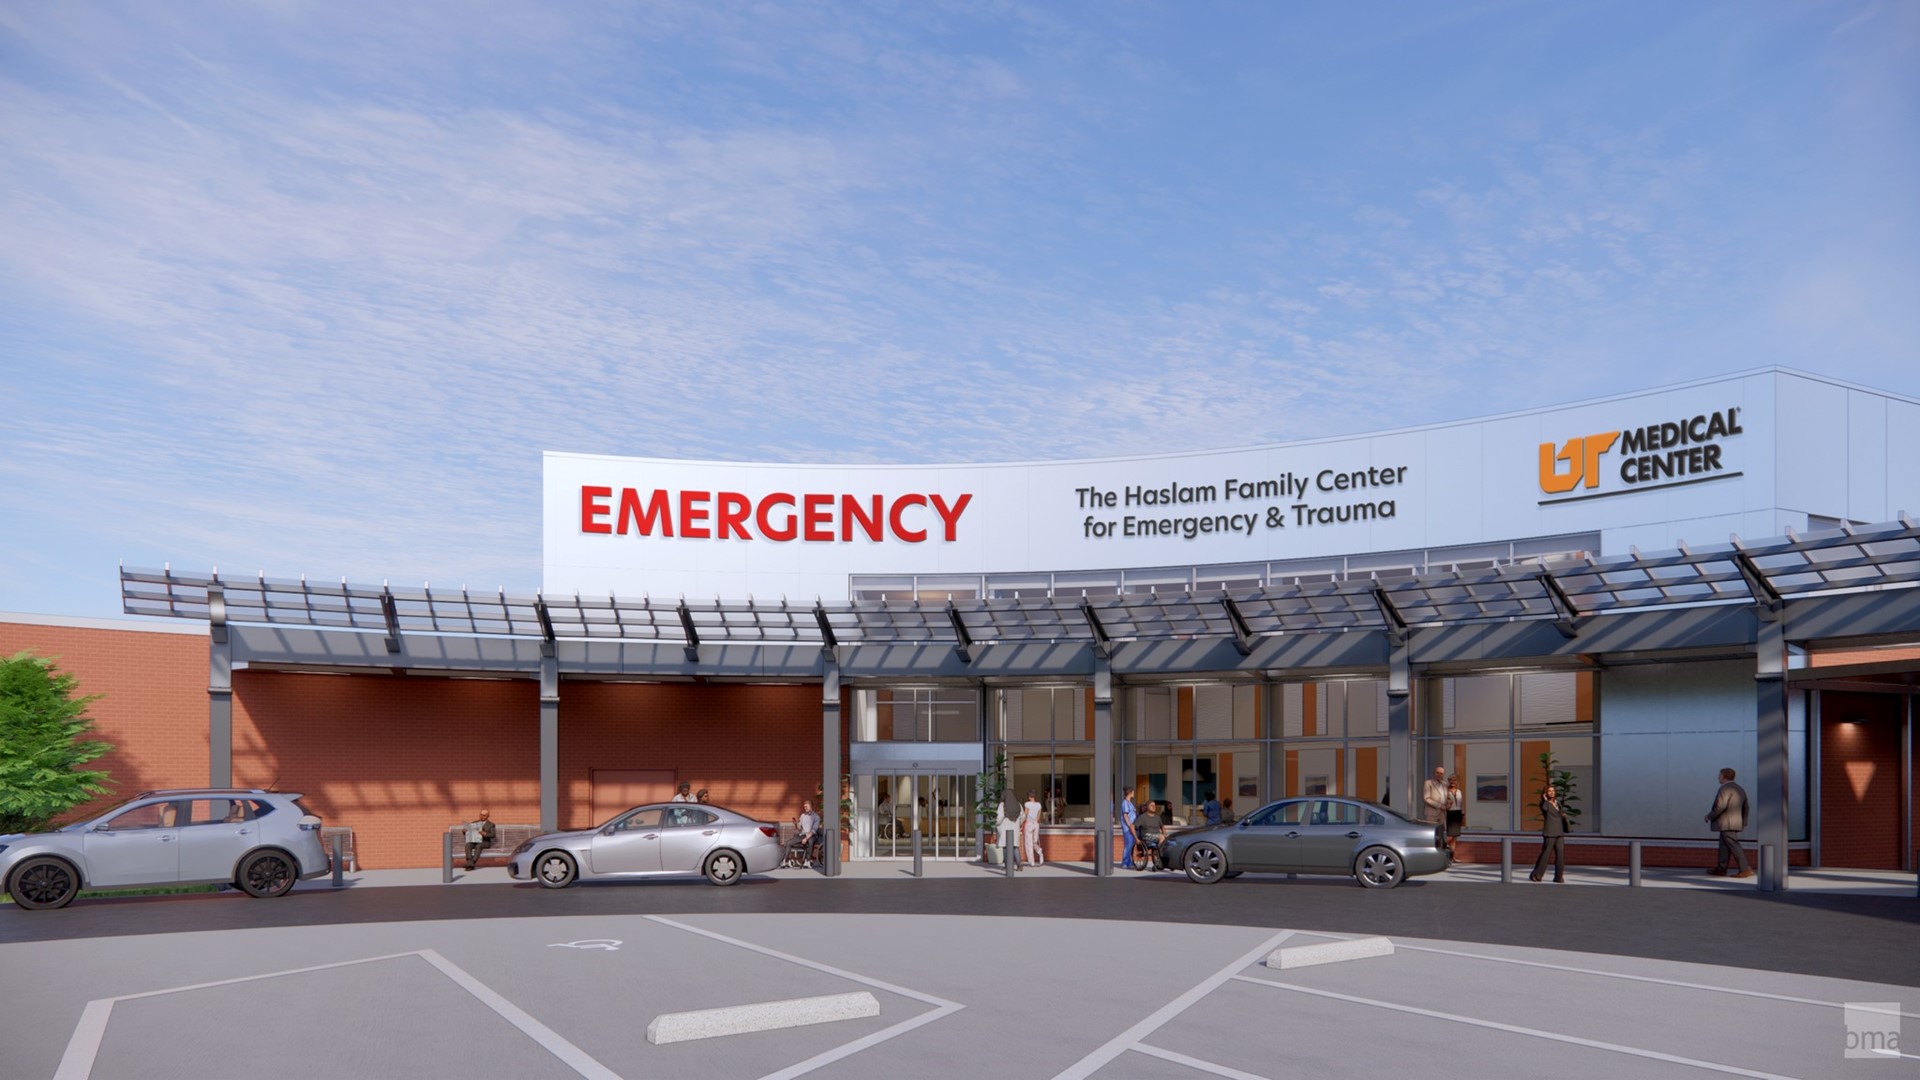 The University of Tennessee Medical Center announced the expansion of its Emergency Department, delivering care to patients in the East Tennessee community.